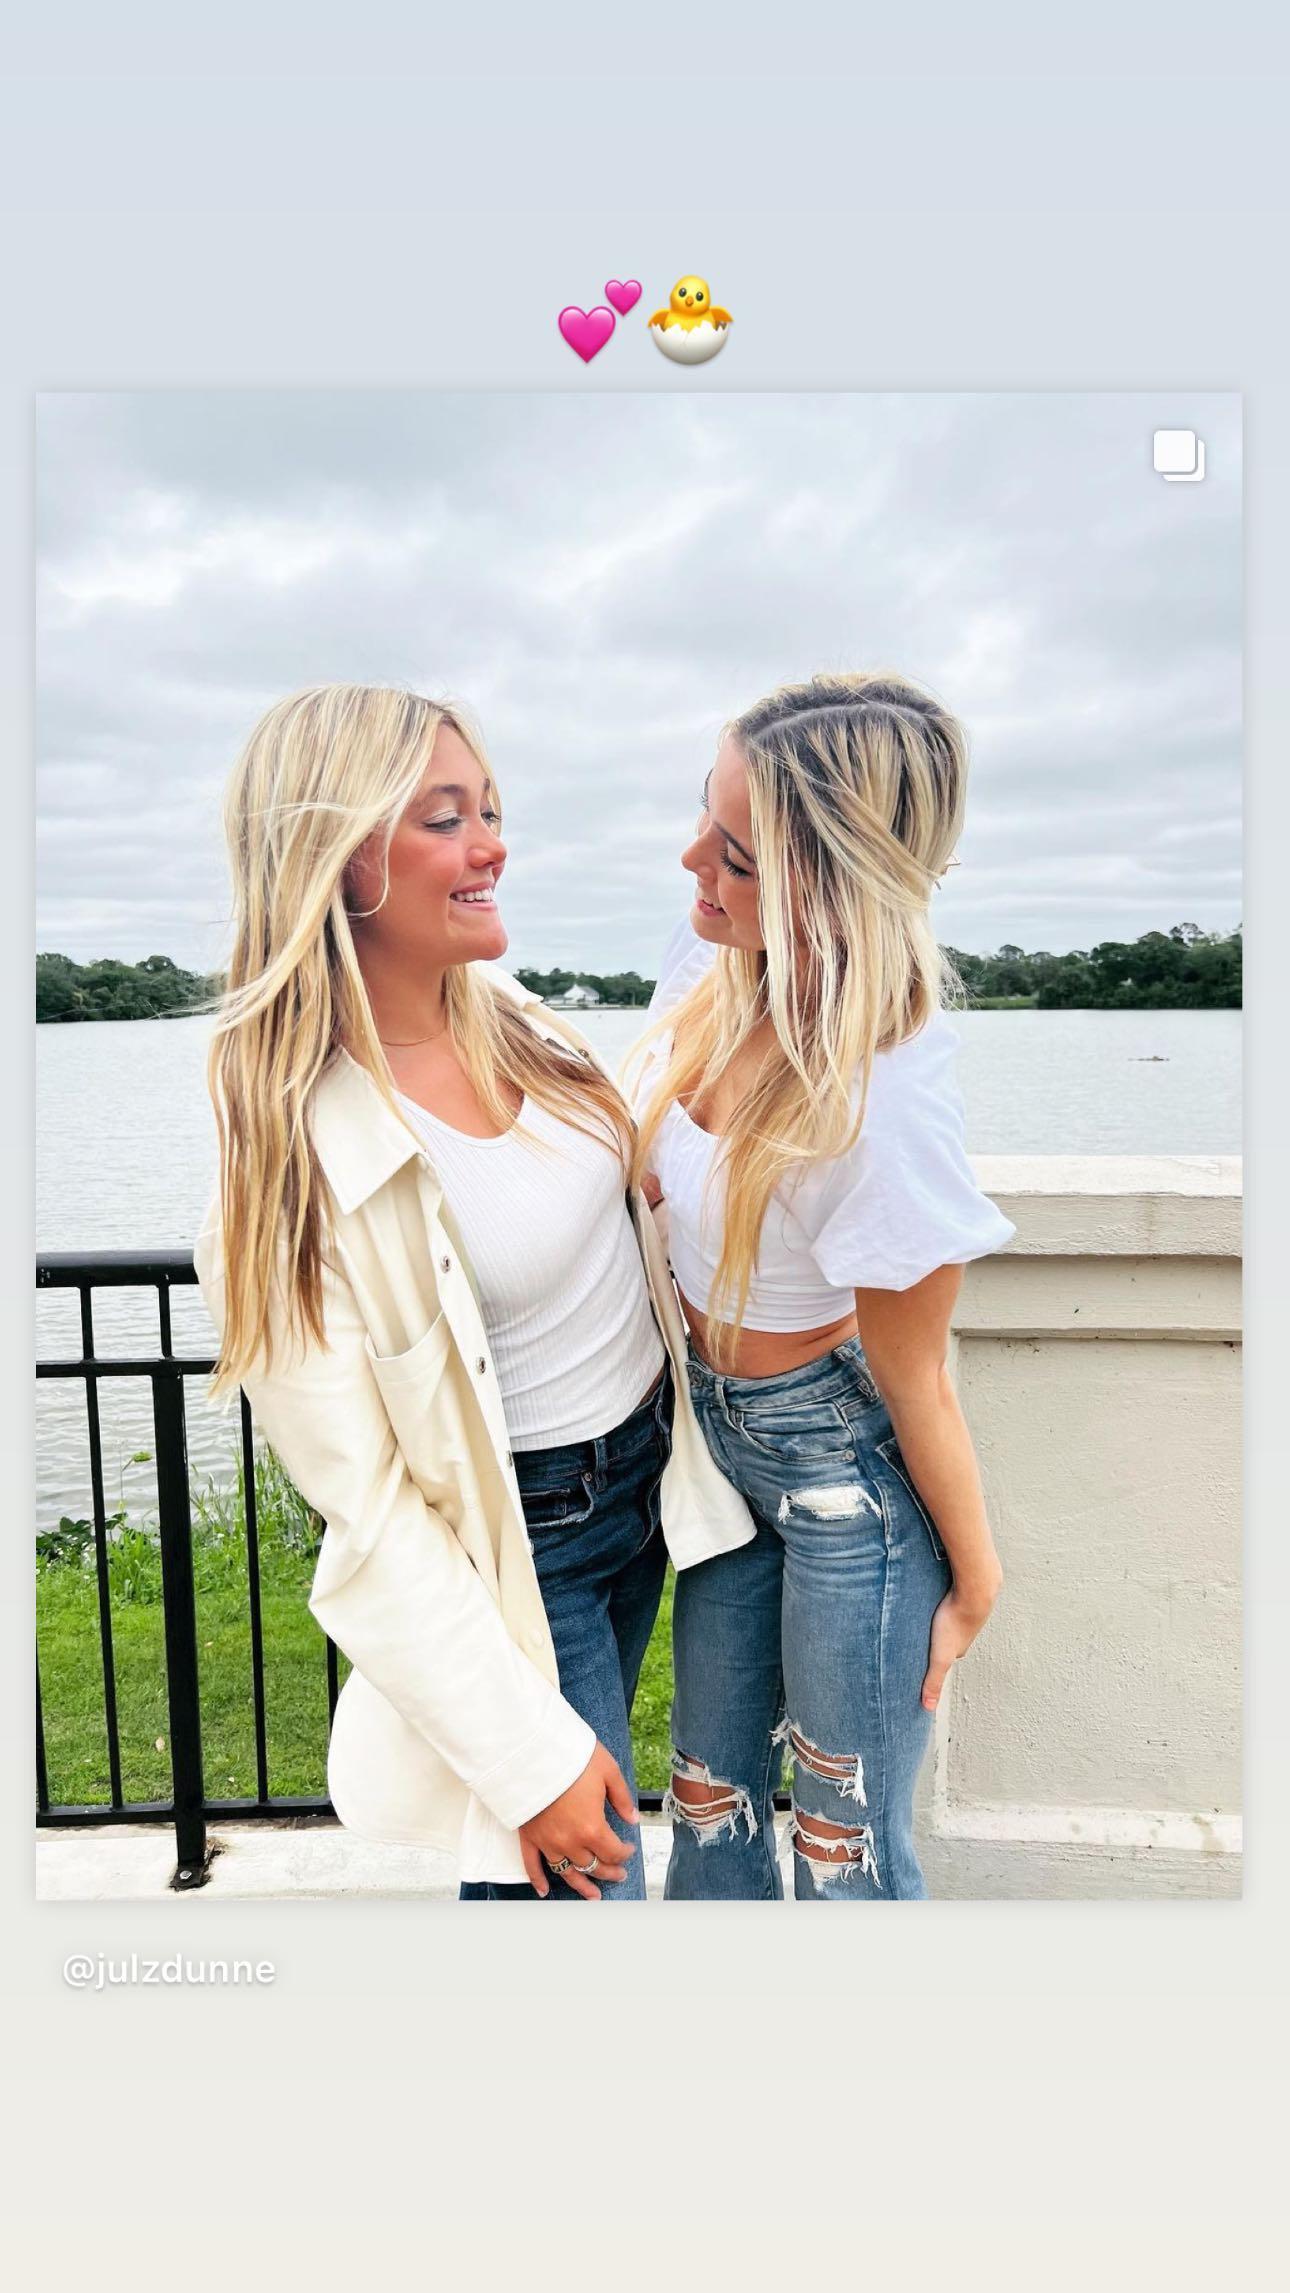 Olivia Dunne posing with her sister Julz.